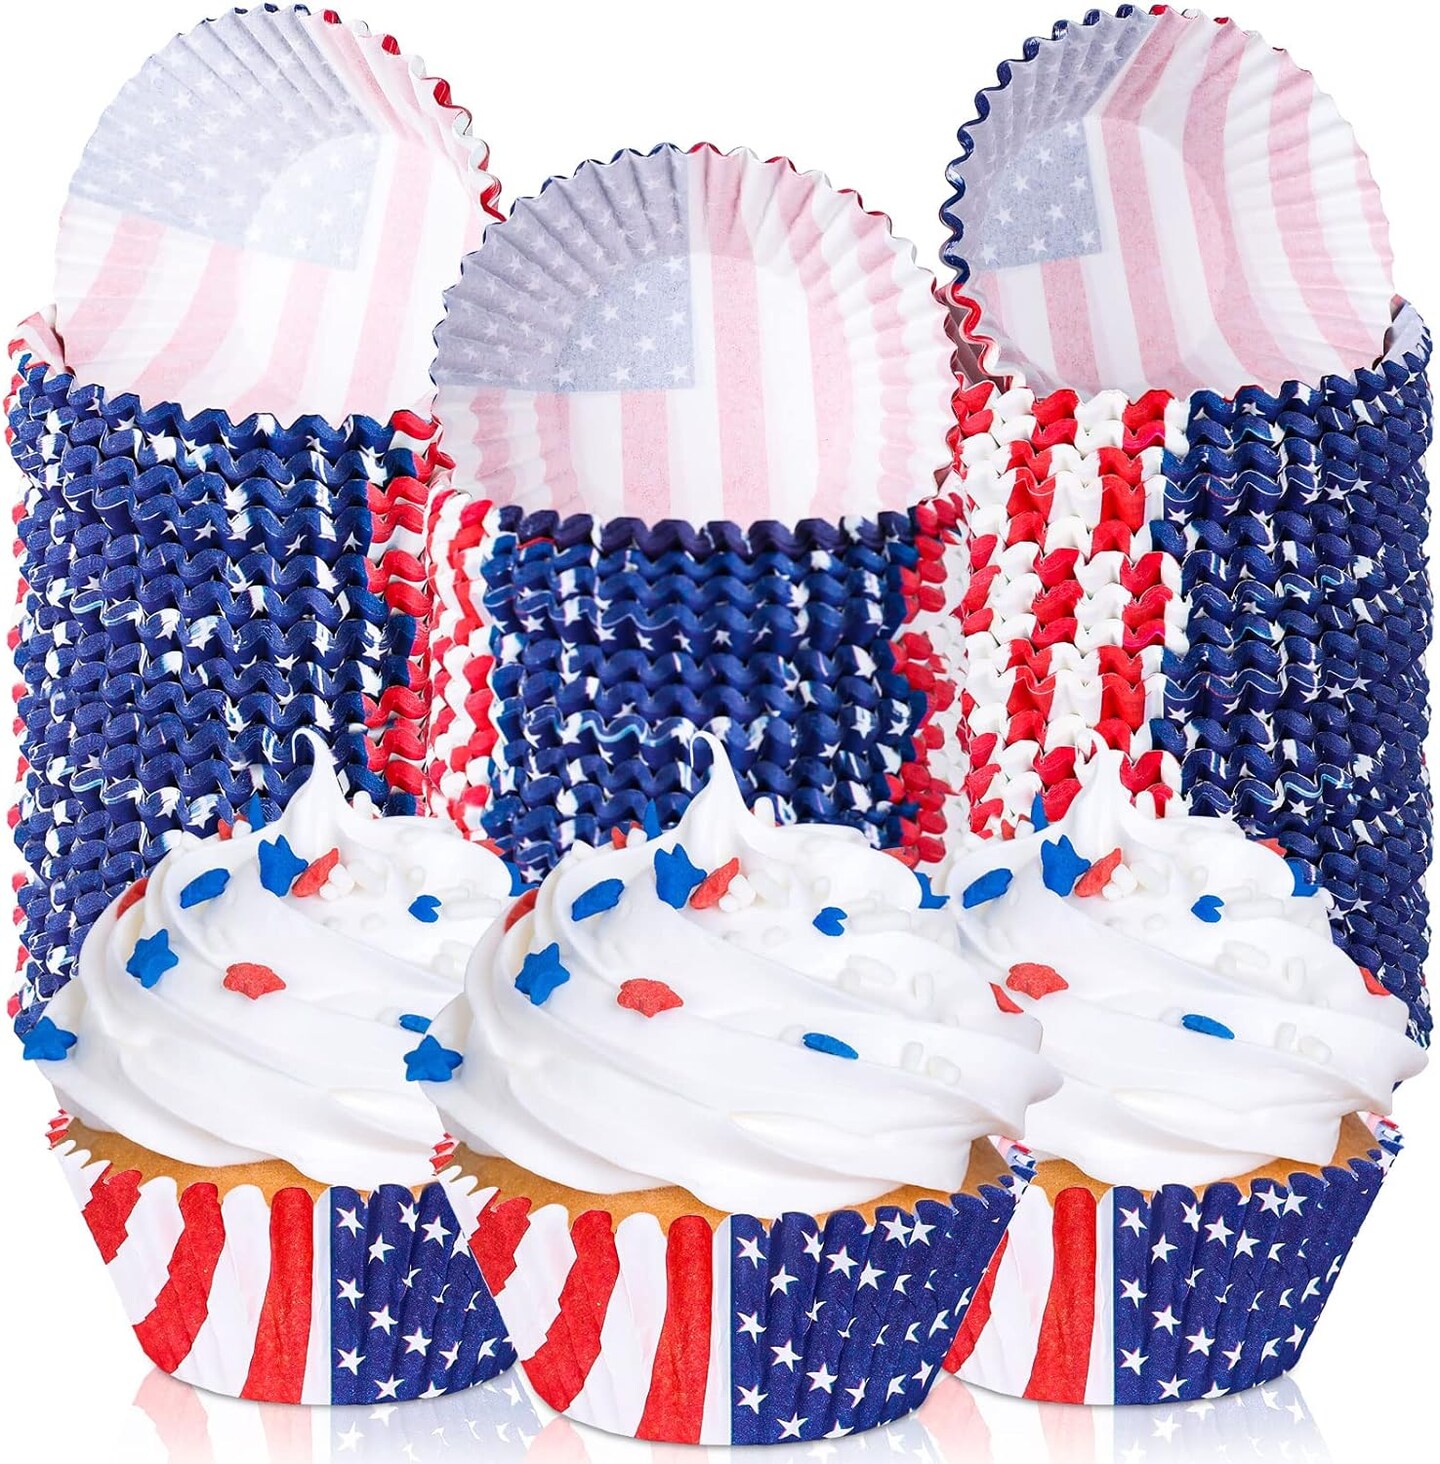 600 Patriotic Baking Cups. Cupcake Liners for July 4th, with stars and stripes.